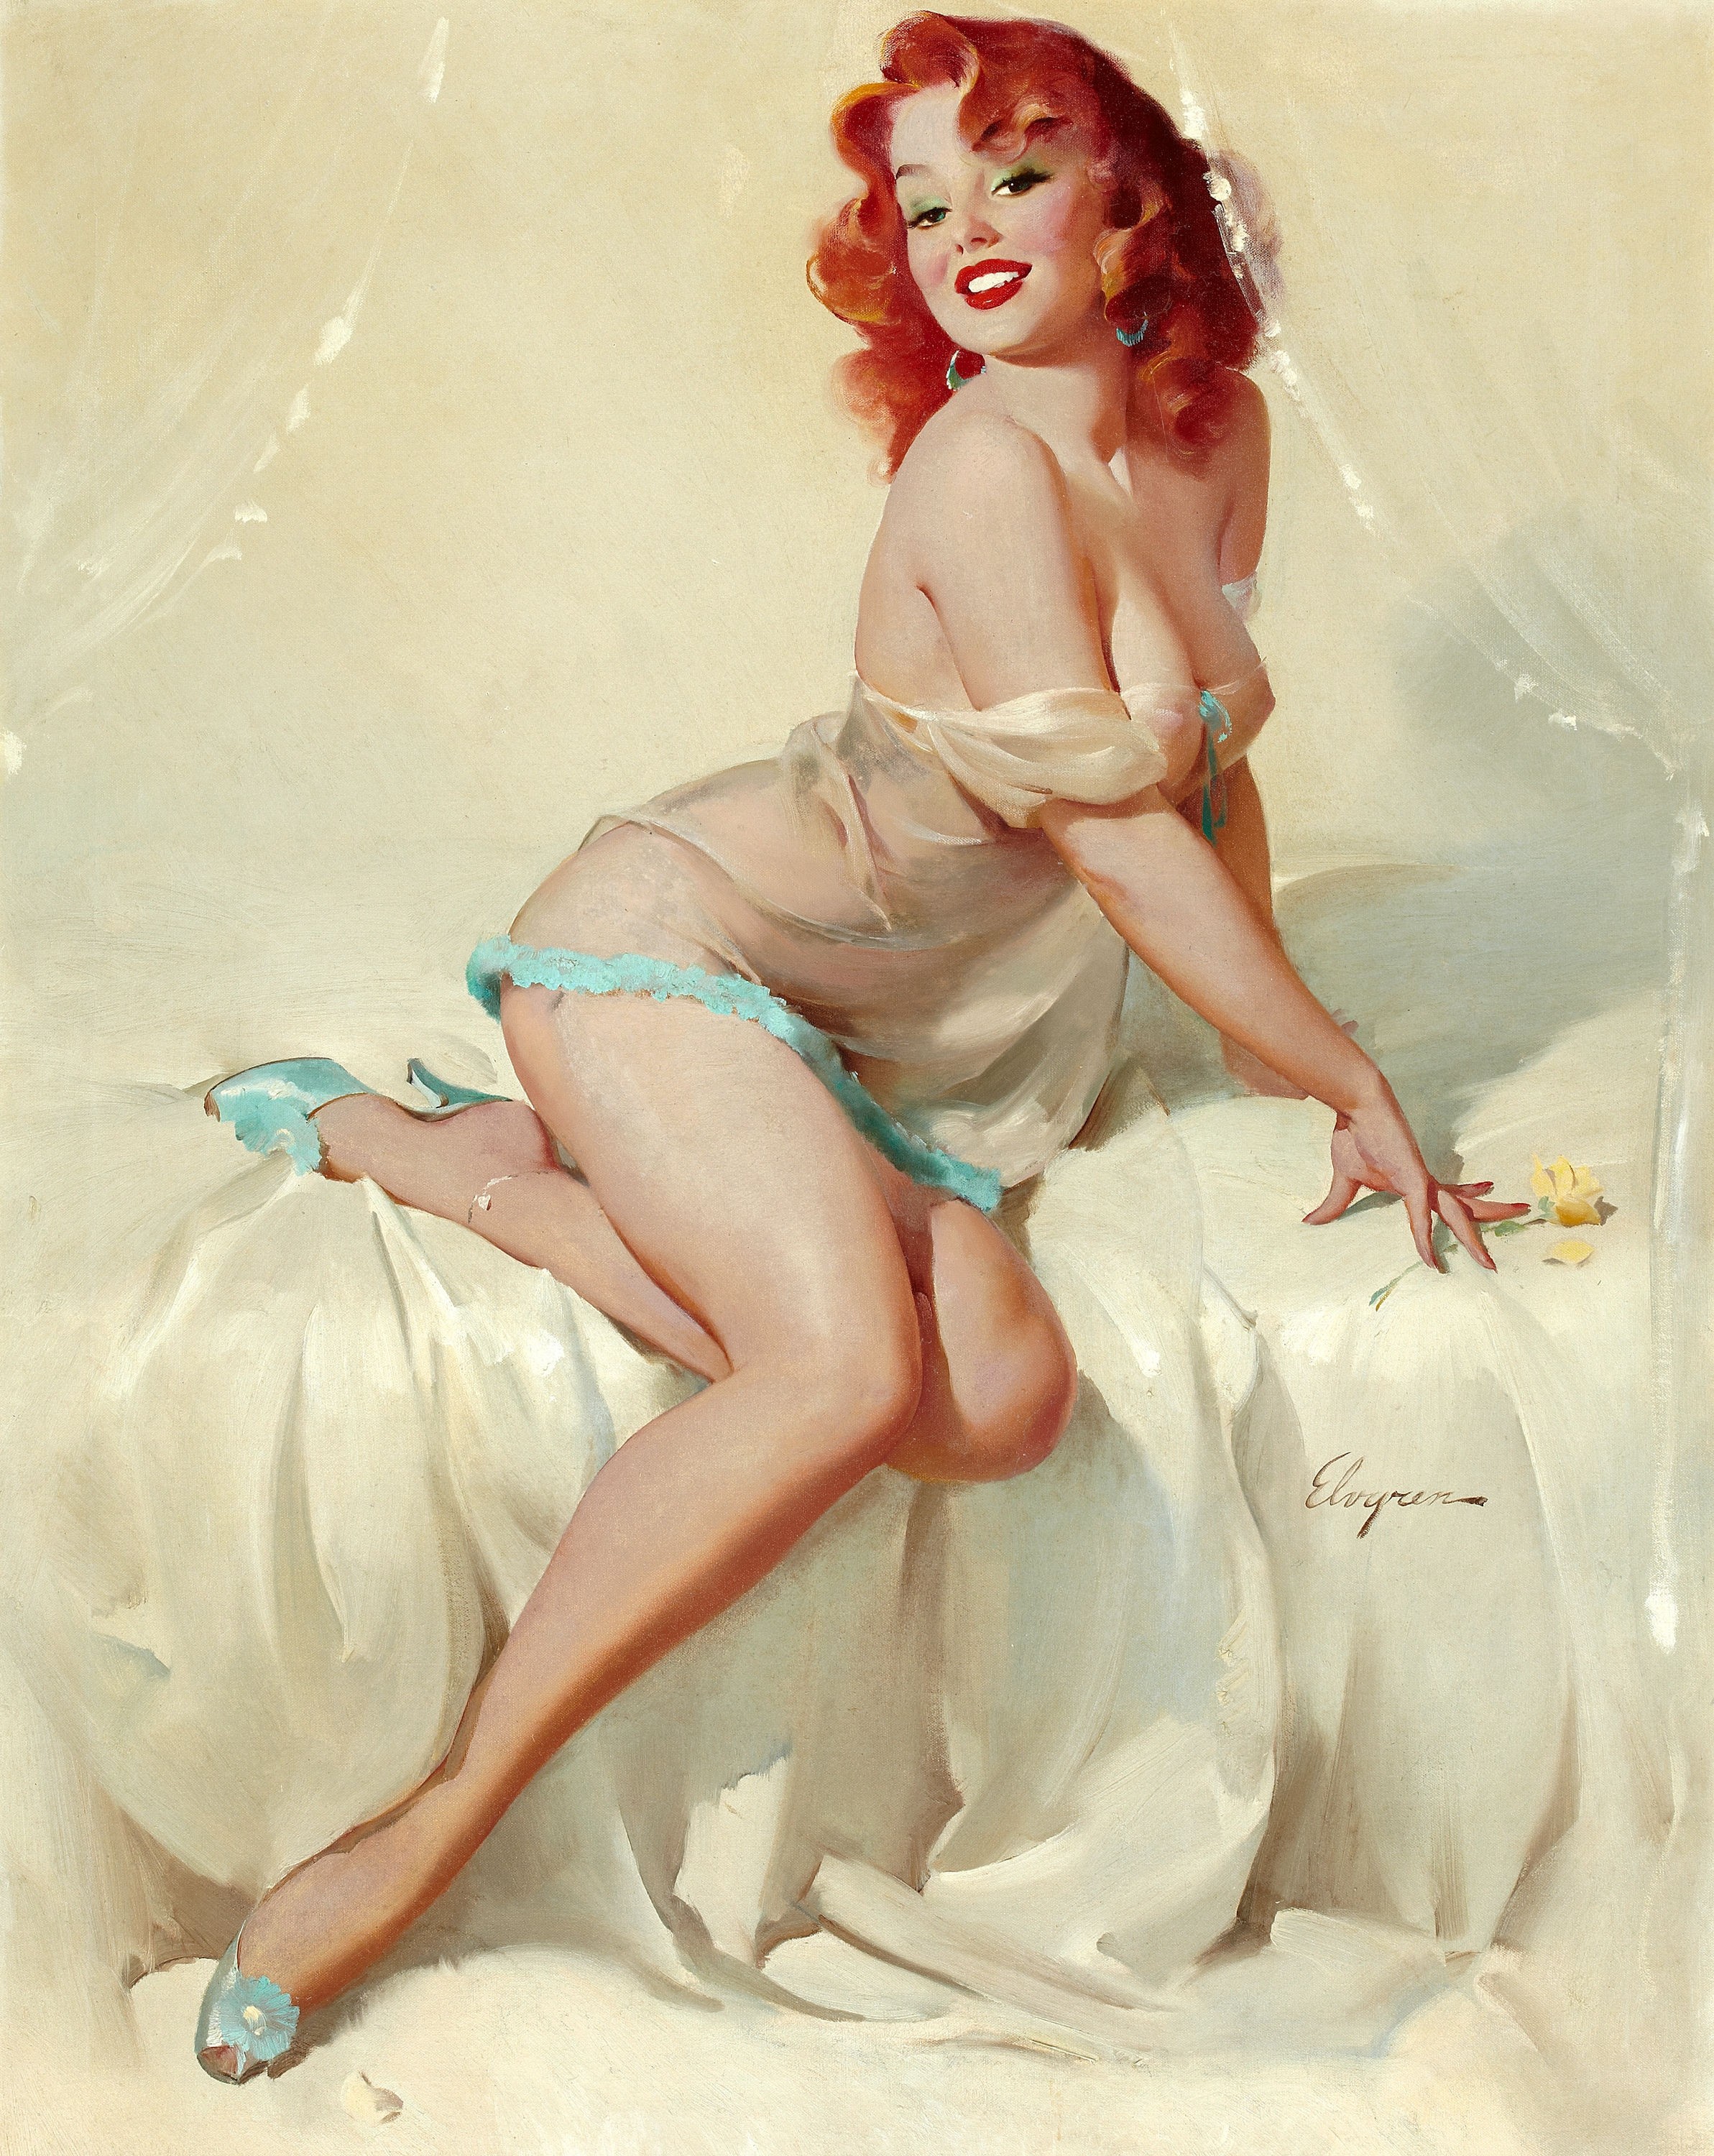 General 2385x3000 redhead drawing traditional art simple background women artwork pinup models legs smiling looking at viewer heels red lipstick Gil Elvgren